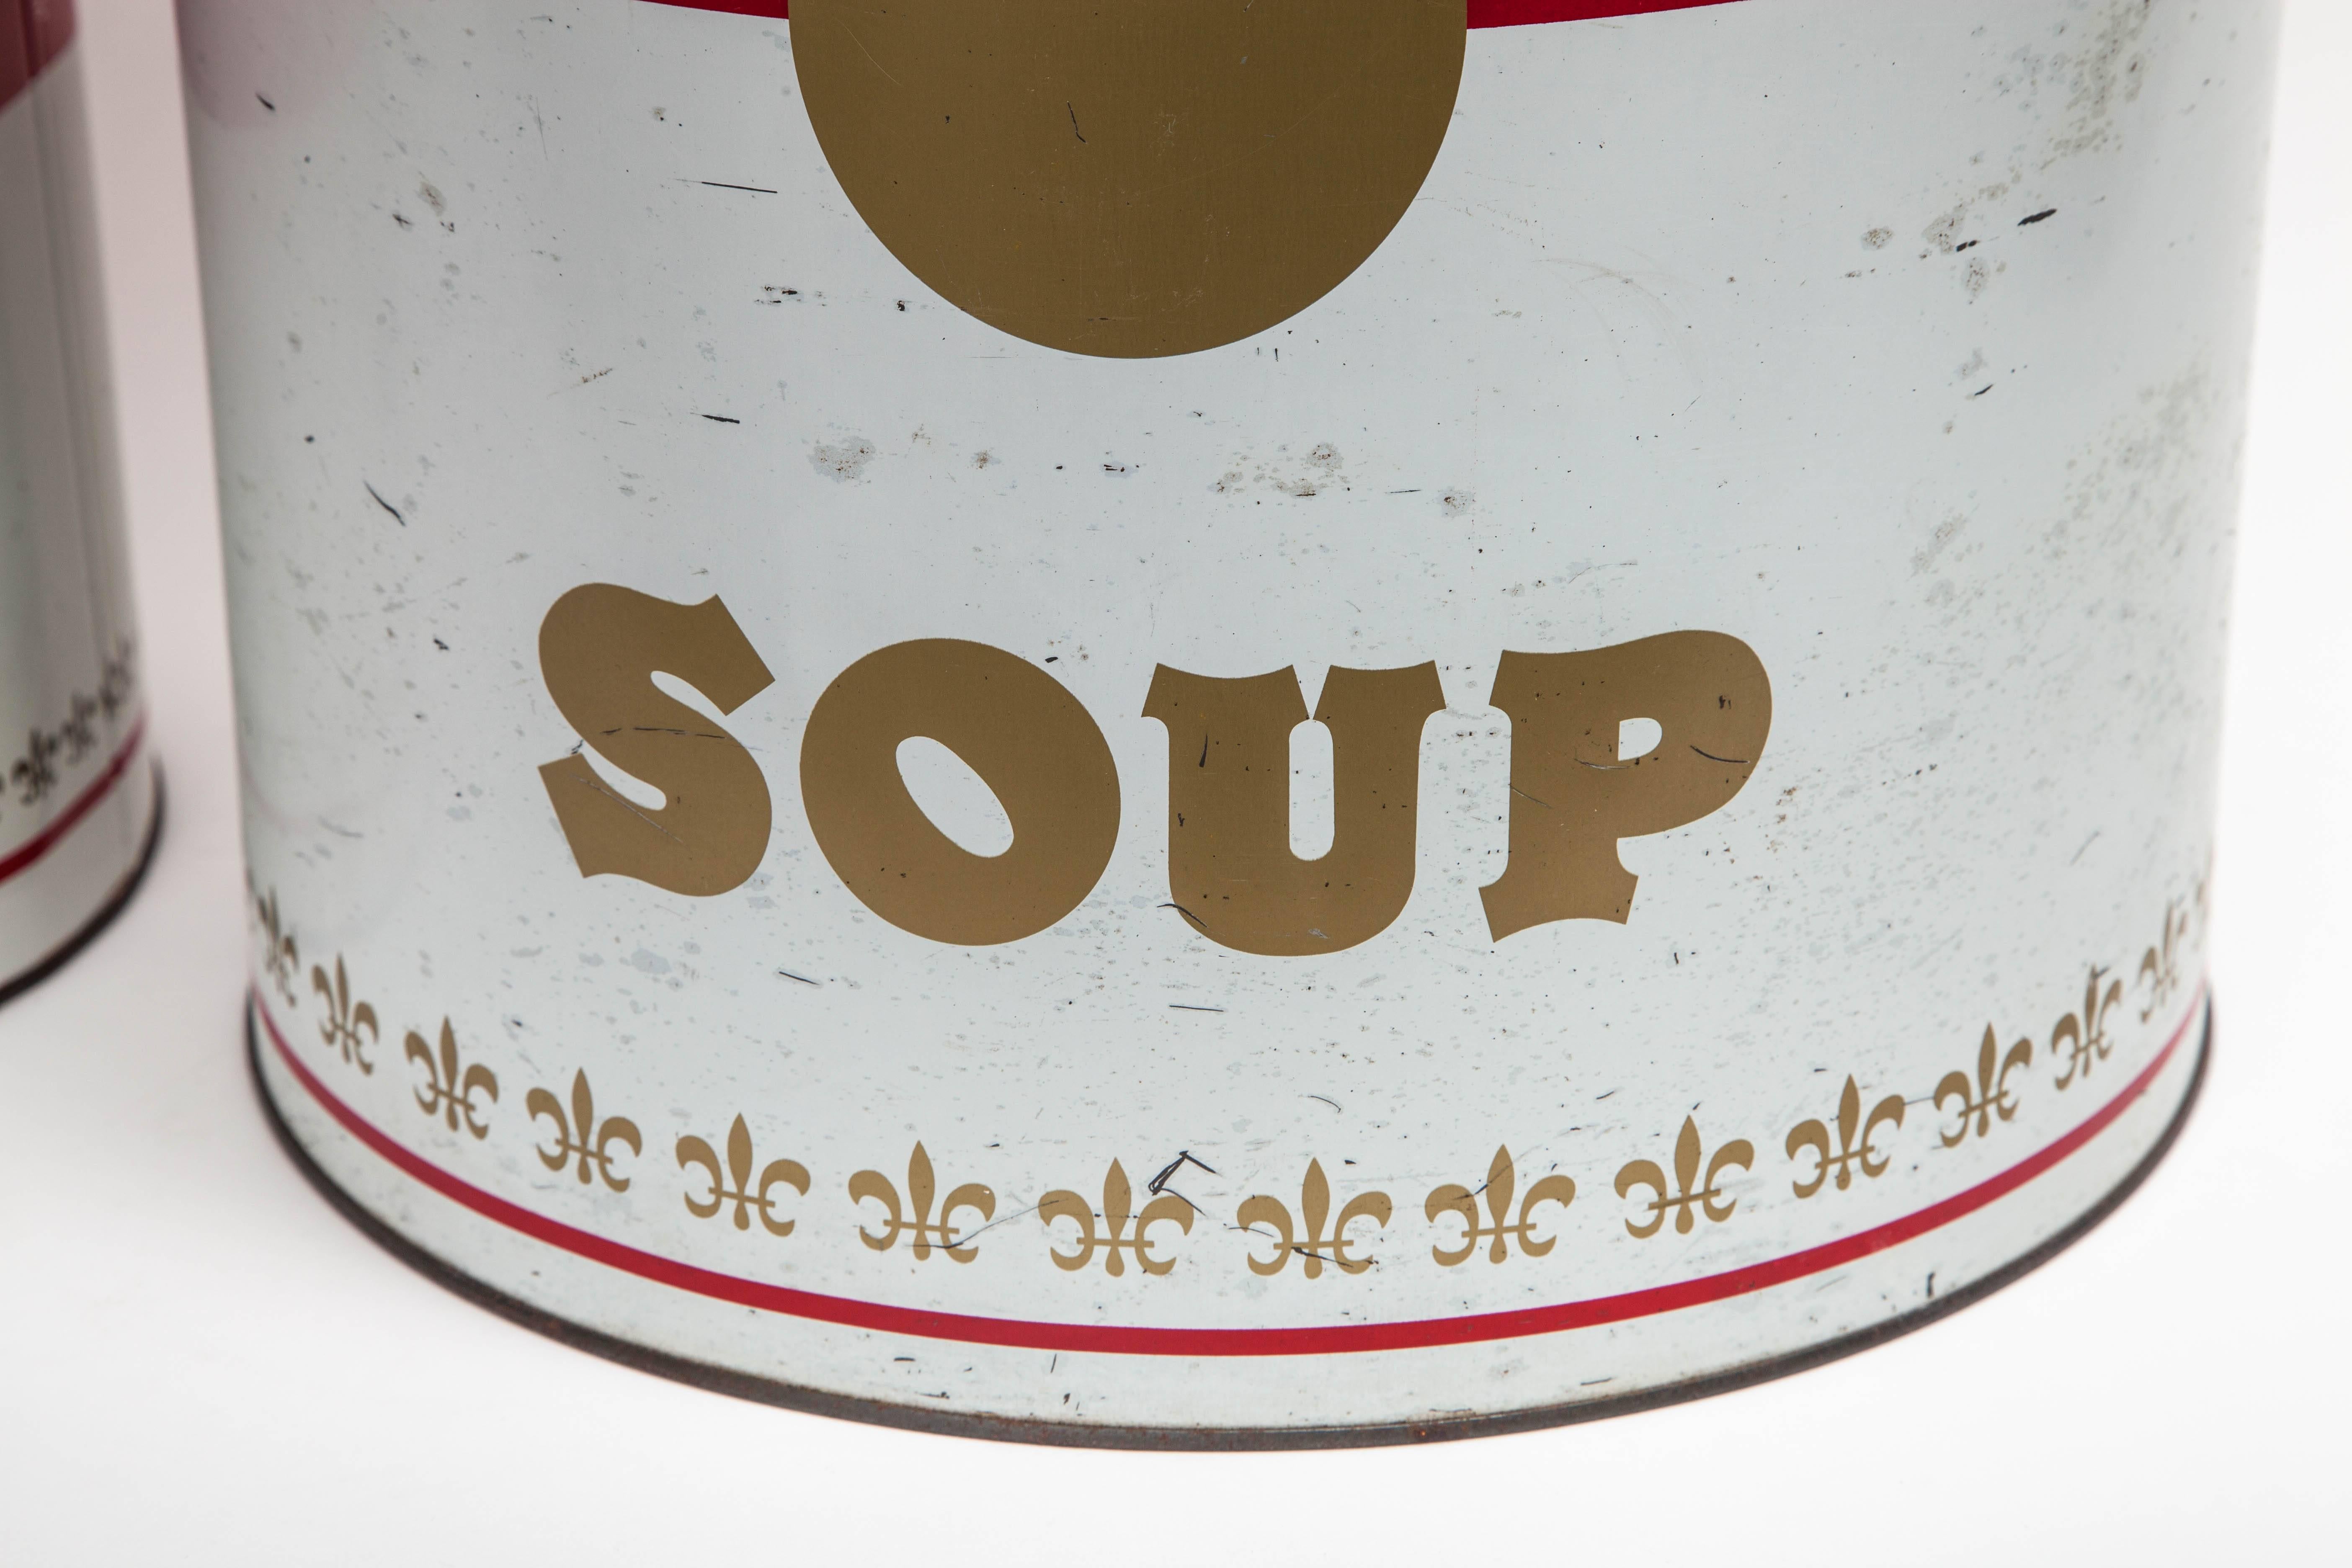 Andy Warhol (after) Pop Art Campbell's Soup cans, USA, 1960s. Two pop art after Andy Warhol 1960s store display soup cans manufactured by Plasticonvertible Corporation of Bedford, Massachusetts. Measures: Larger is 16.25'' high x 13